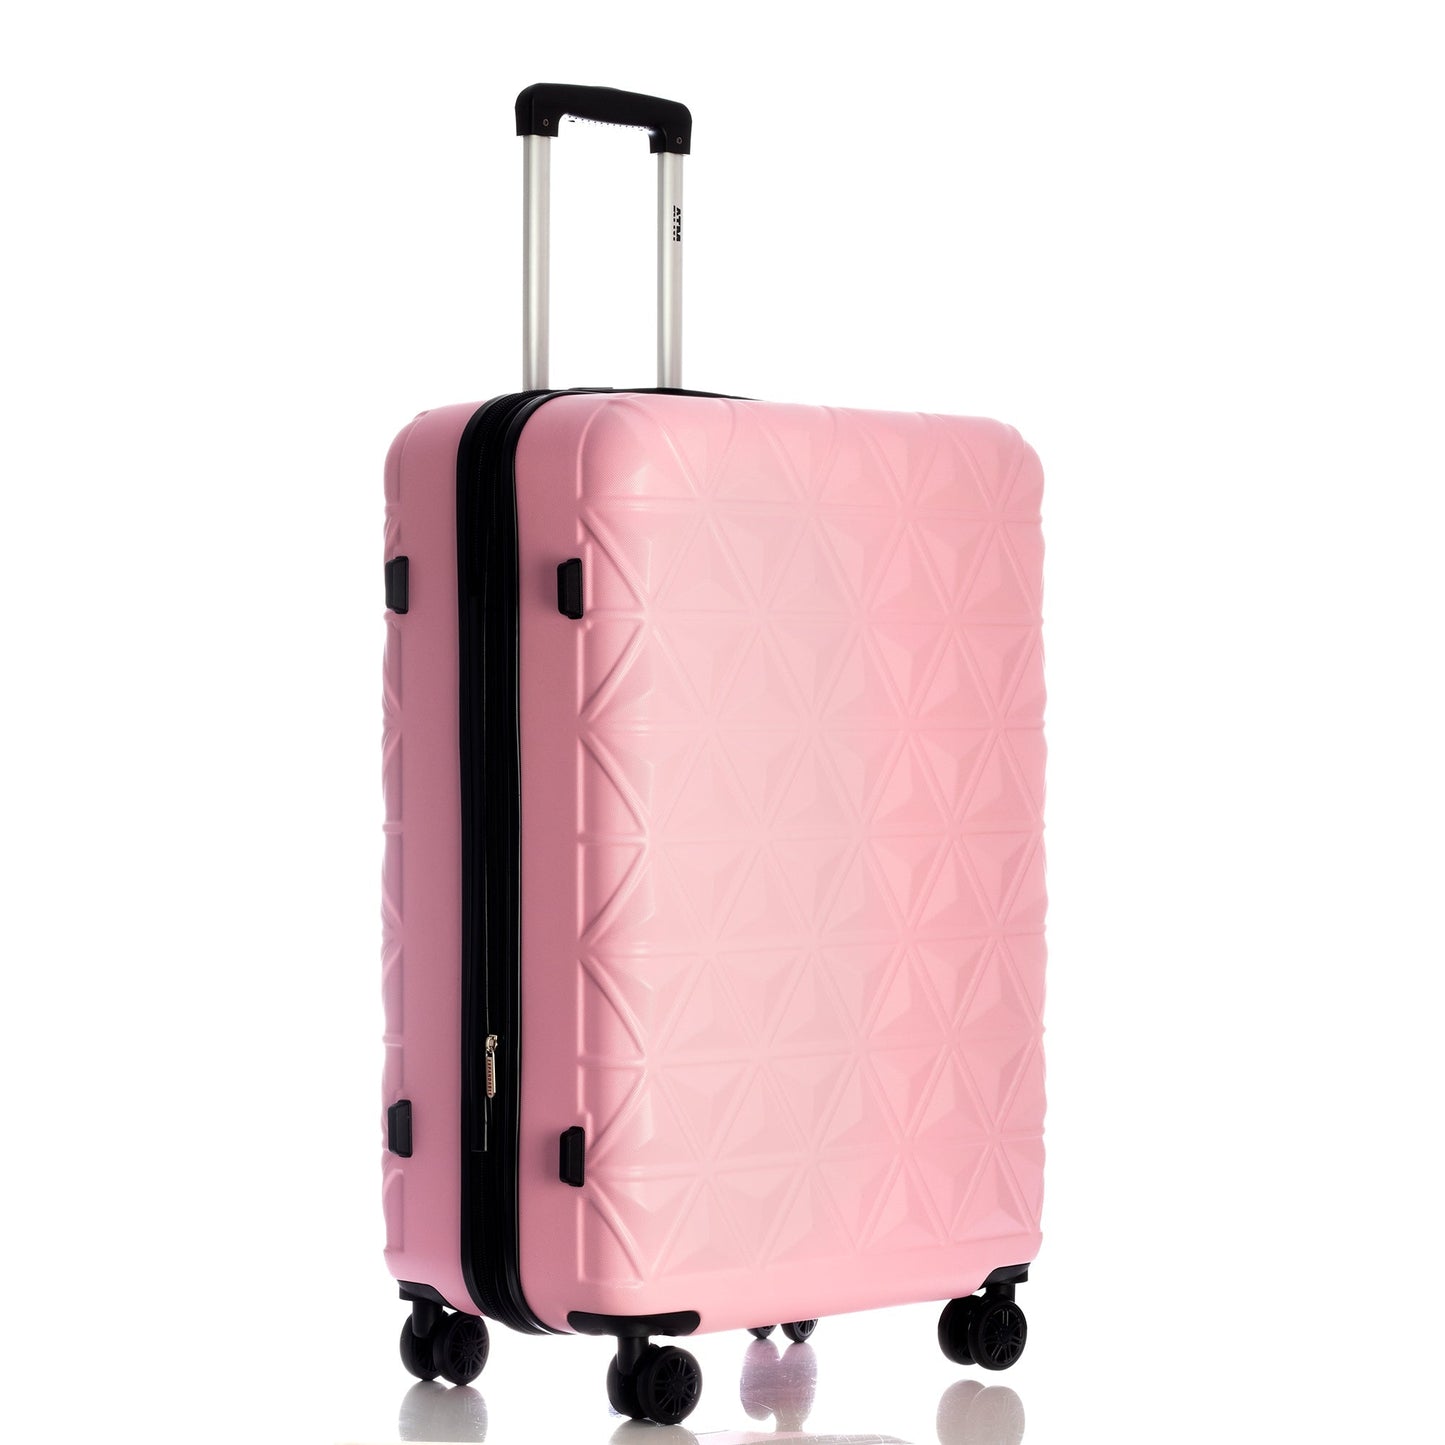 Cosmos Collection Pink Luggage 3 Piece Set (21/25/29") Suitcase Lock Spinner Hardshell